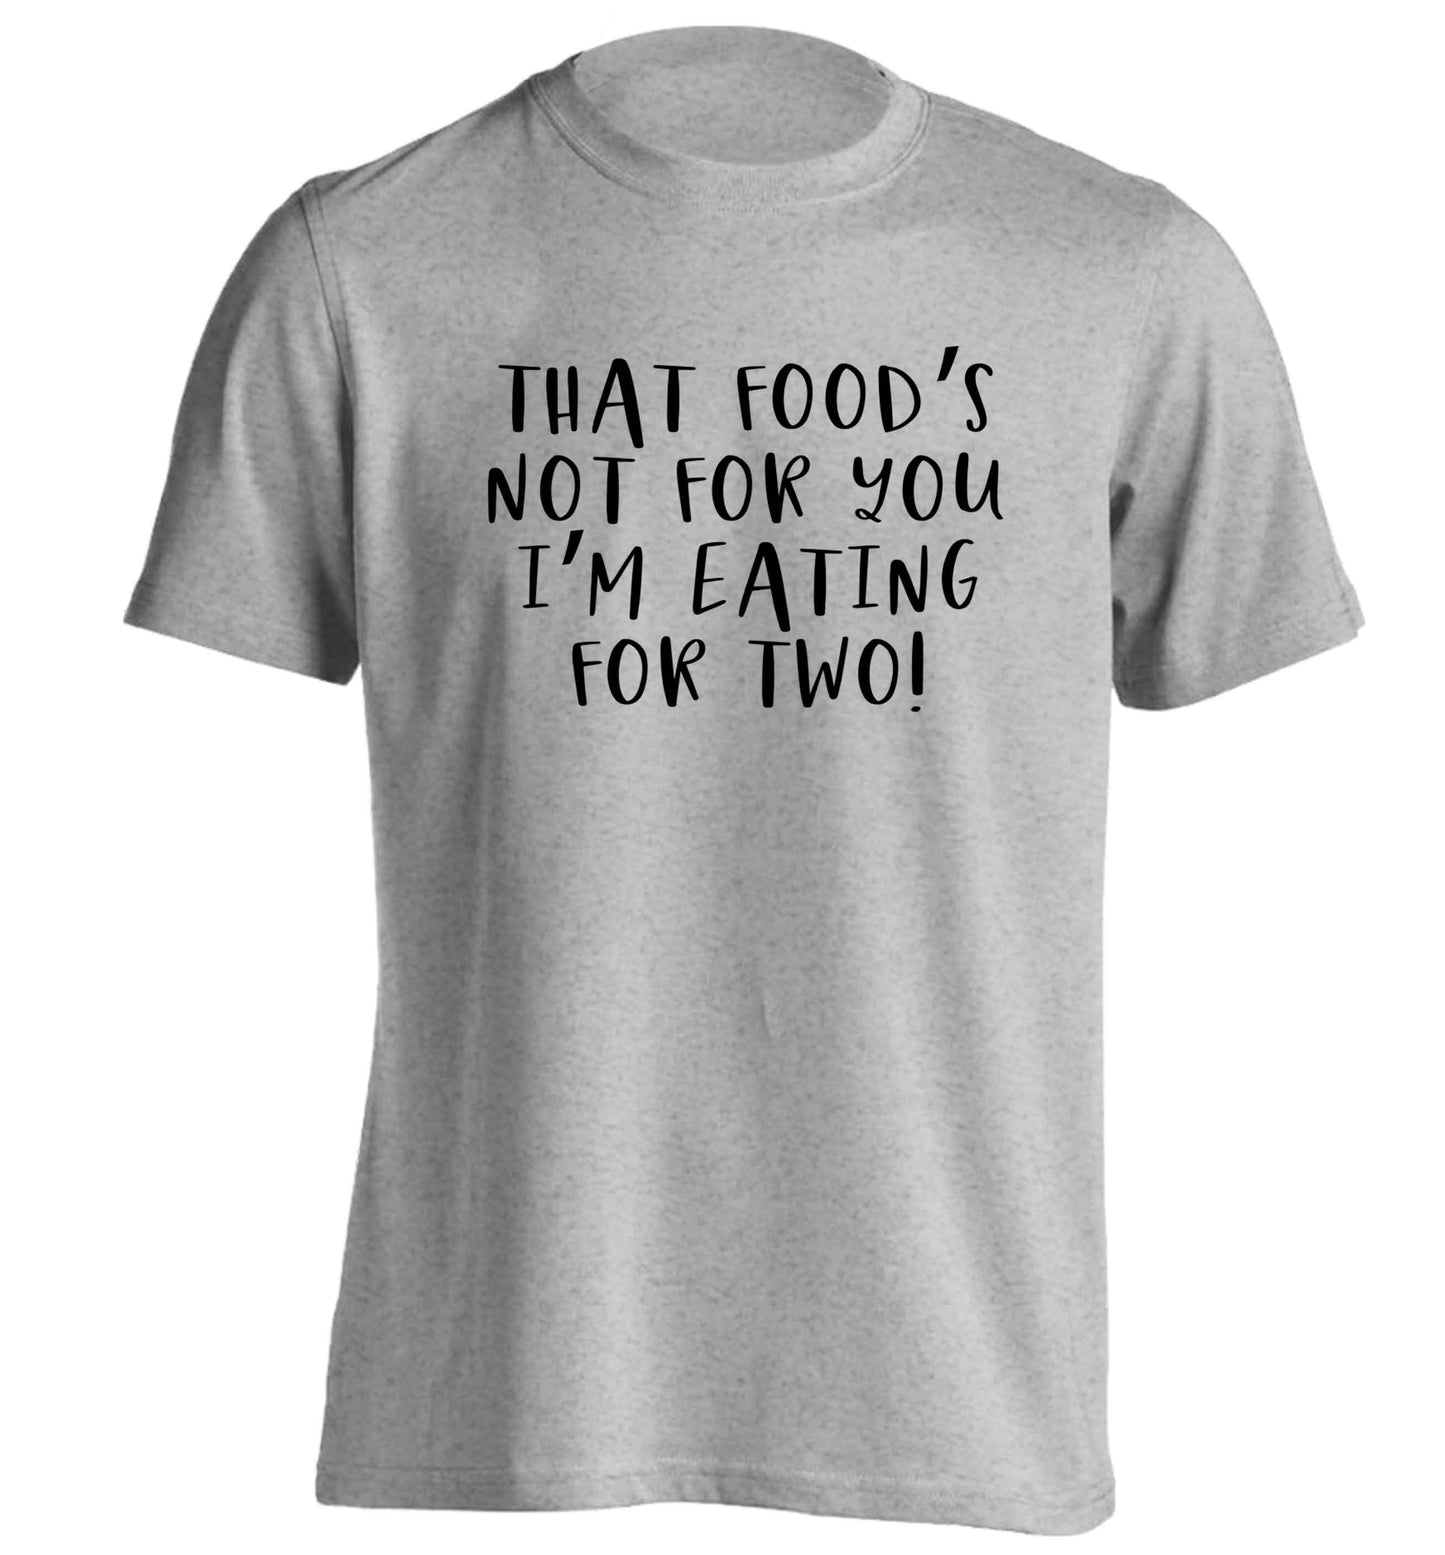 That food's not for you I'm eating for two adults unisex grey Tshirt 2XL